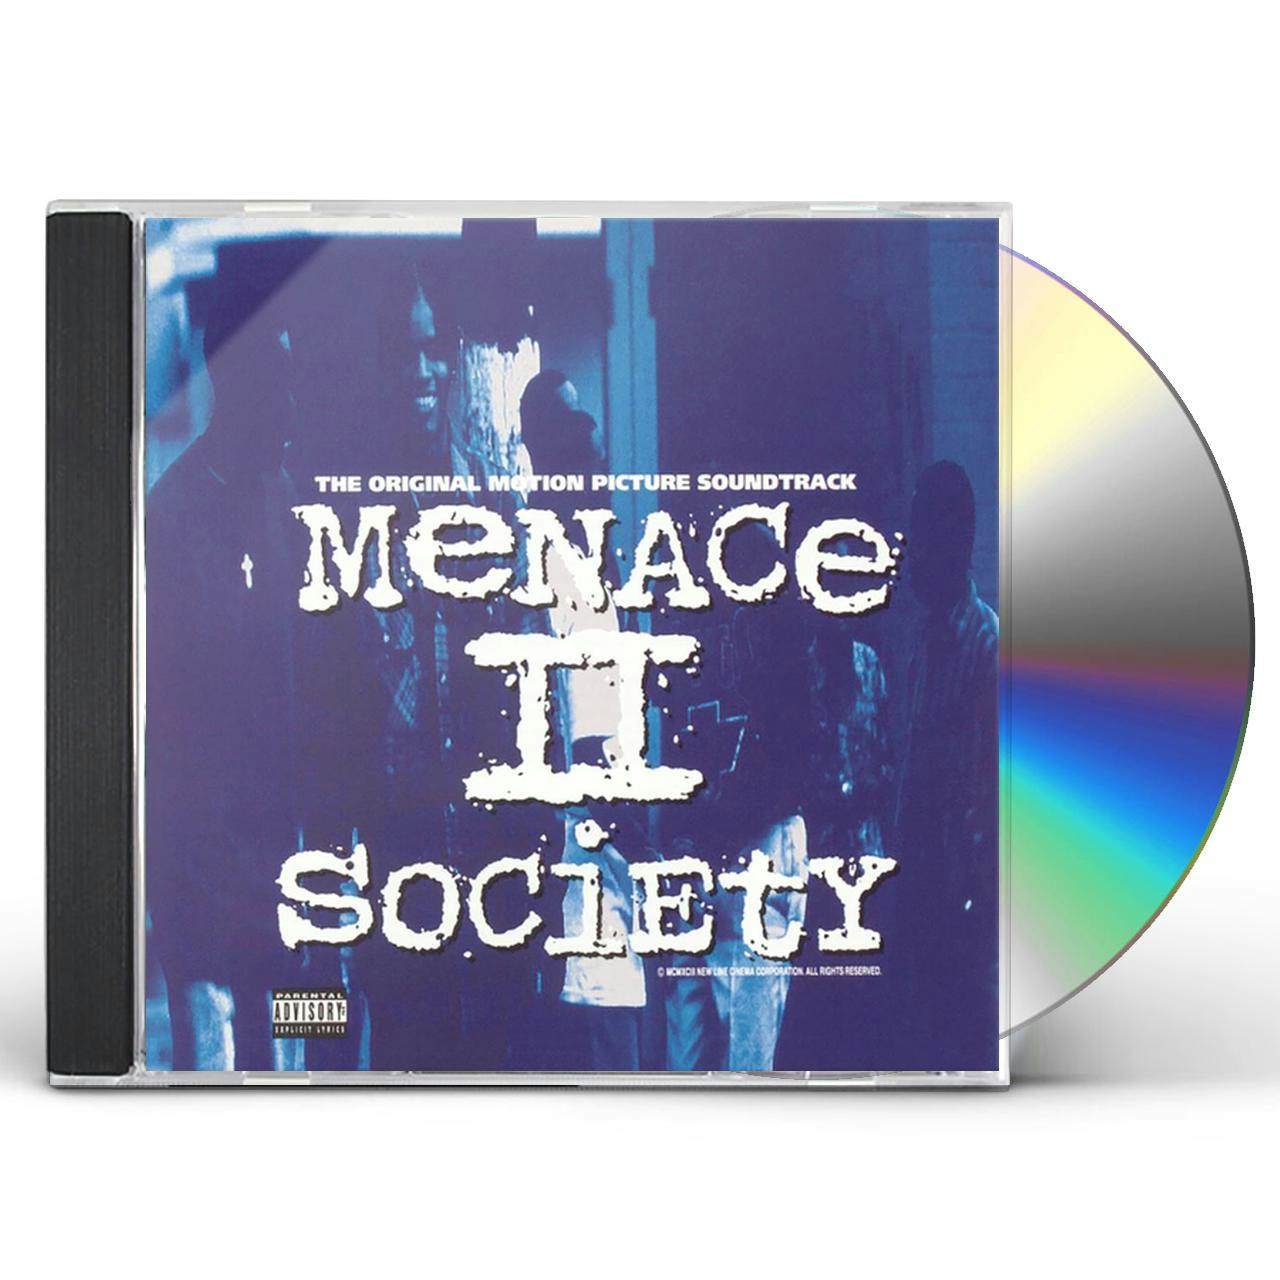 menace to society cover